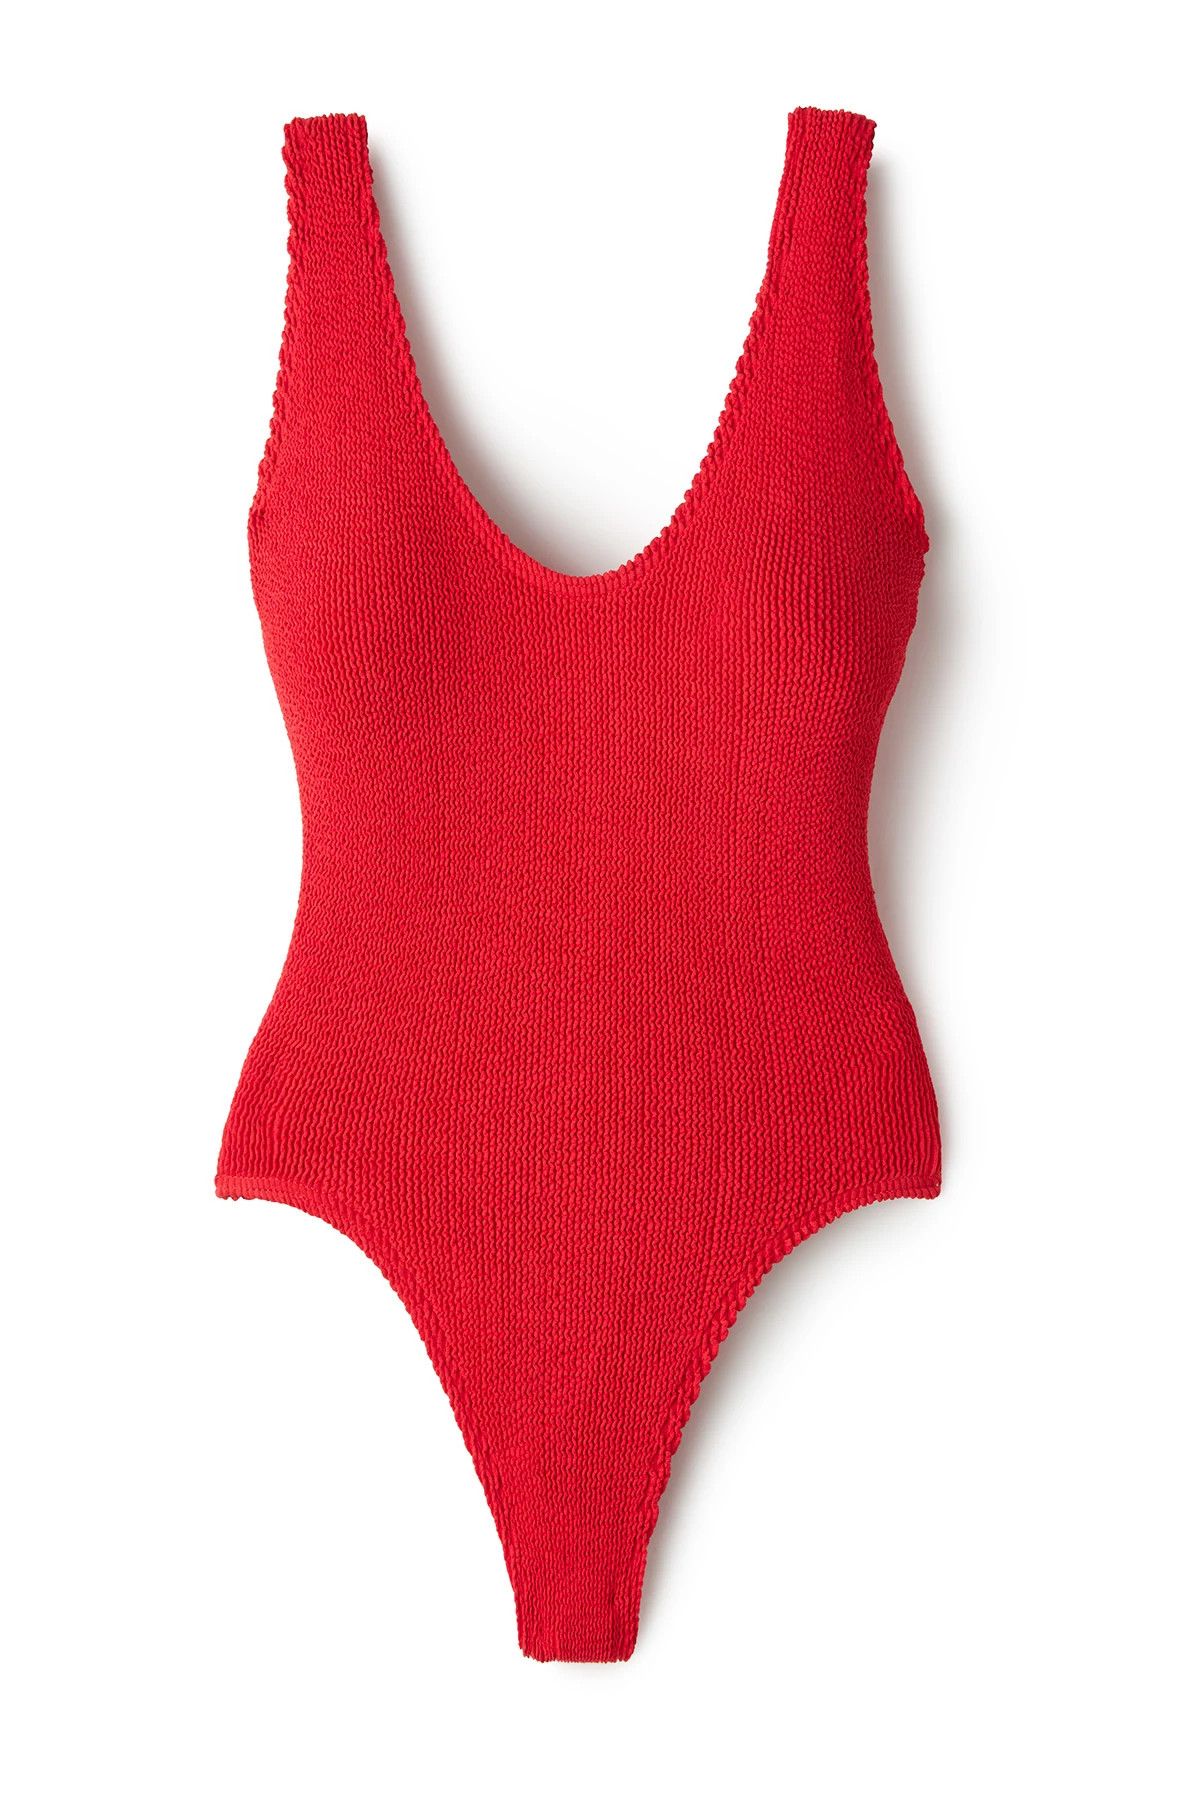 BAYWATCH RED The Mara One Piece Swimsuit image number 5